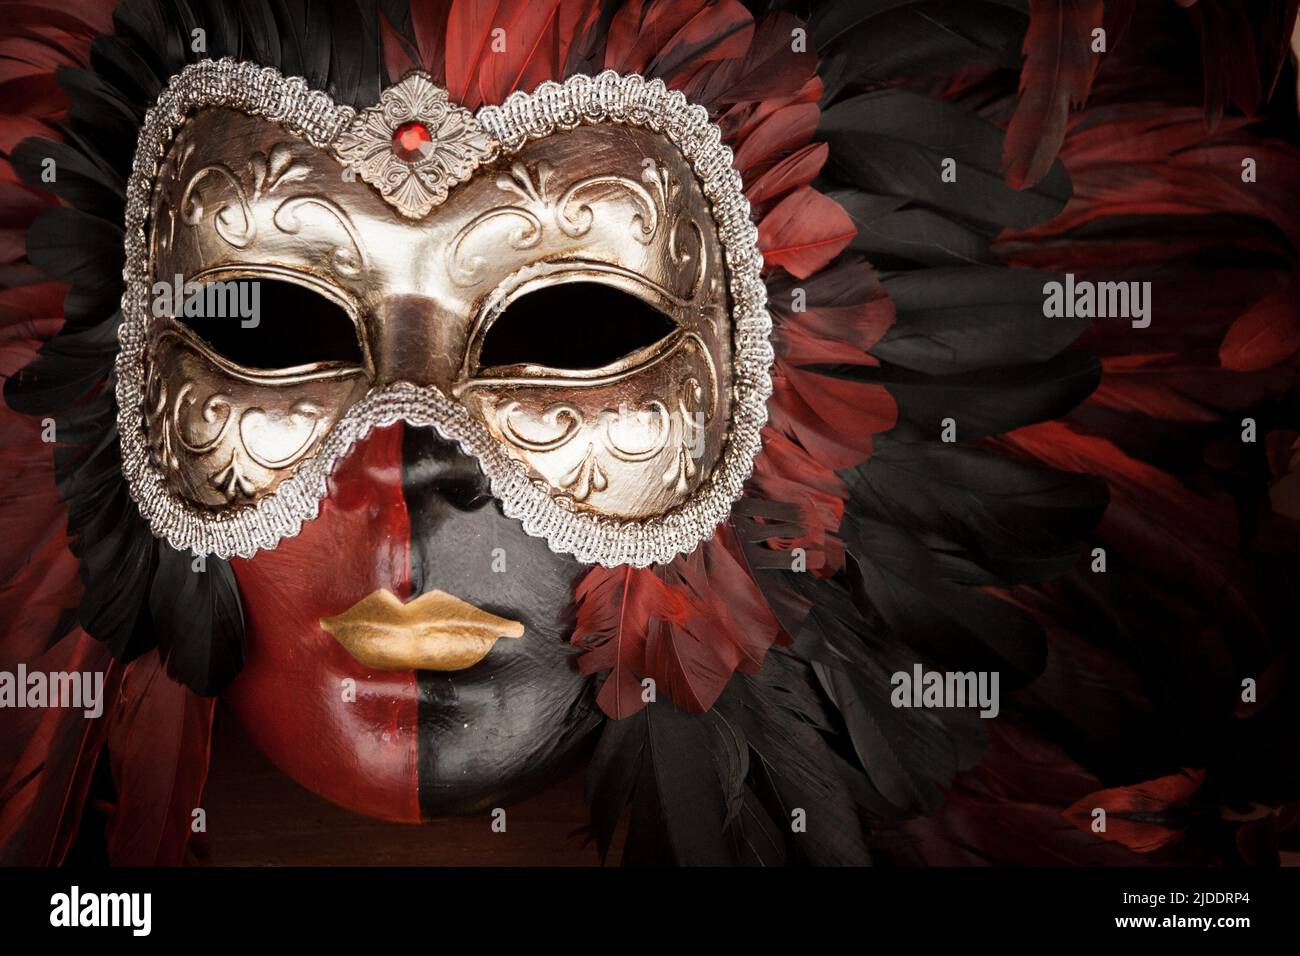 Venetian mask. Close detail of a traditional mask as worn at the famous Carnival in Venice, Italy. Stock Photo